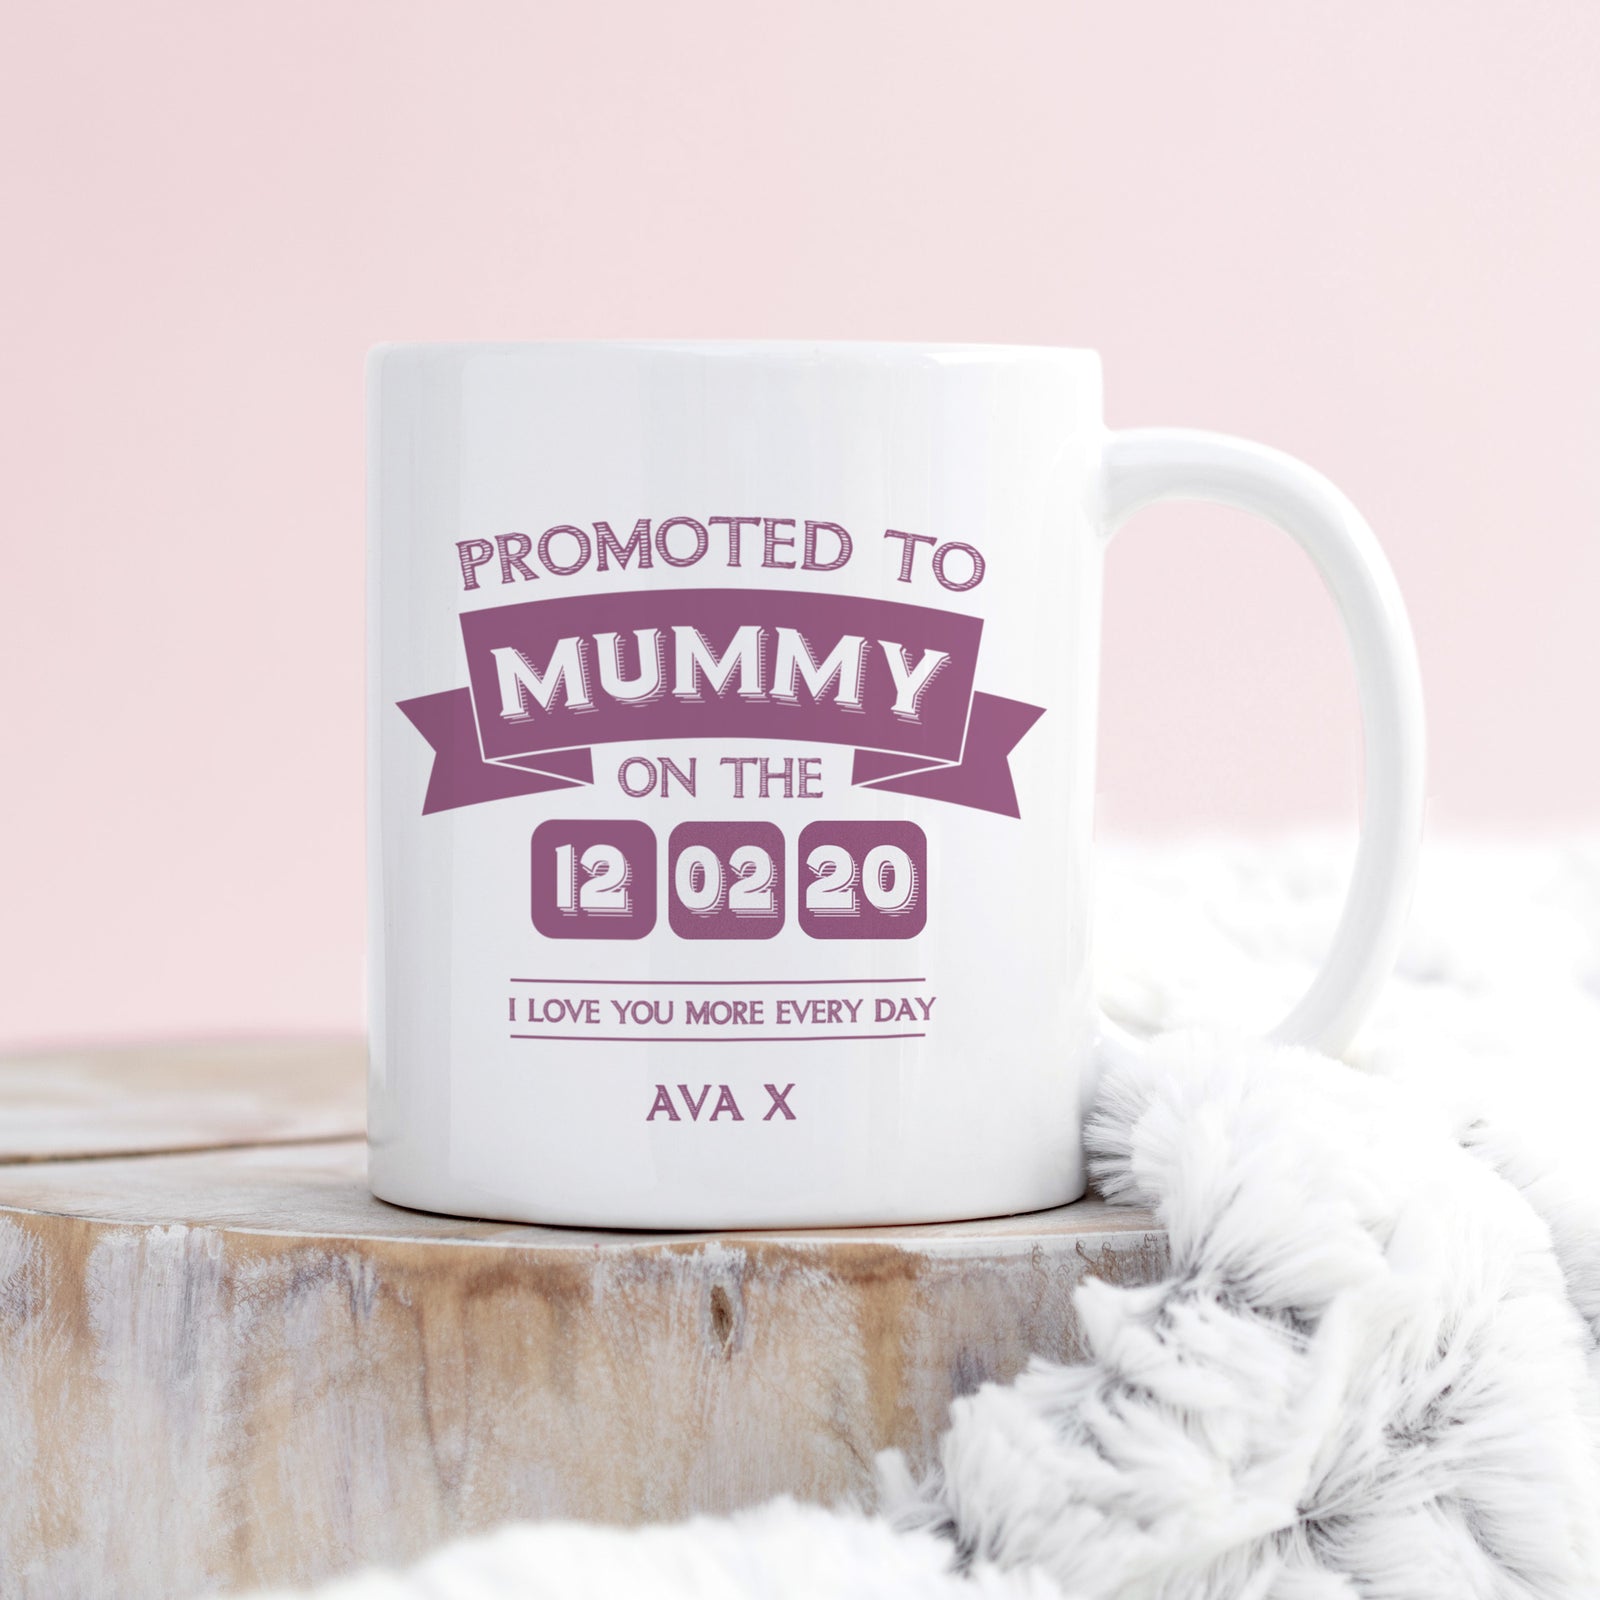 personalised gifts for new mums